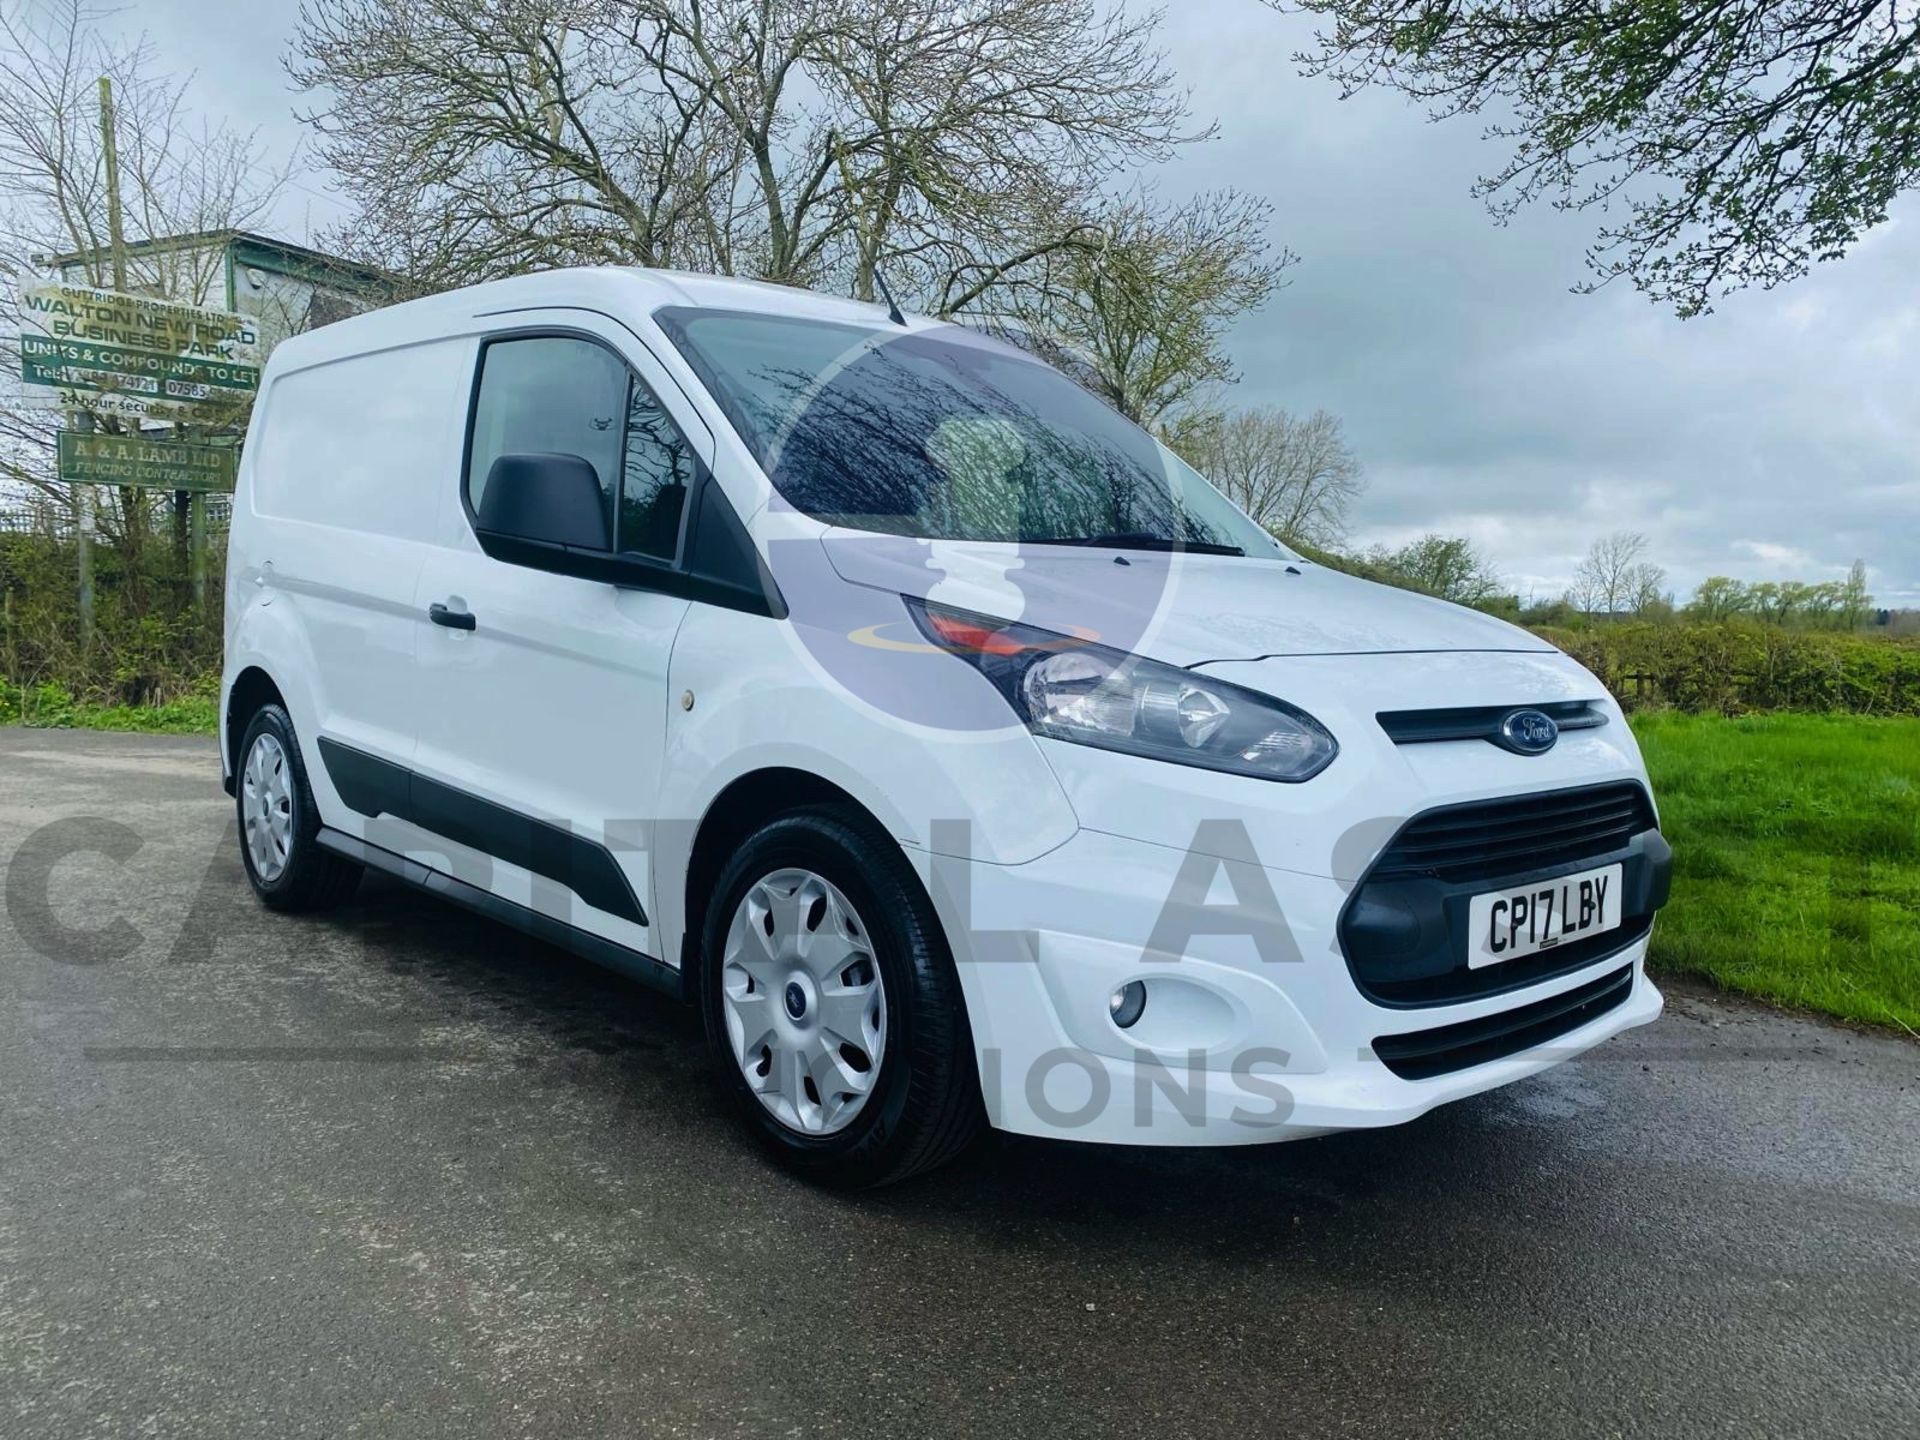 (ON SALE) FORD TRANSIT CONNECT *TREND EDITION* SWB PANEL VAN (2017 - EURO 6) 1.5 TDCI - Image 9 of 24